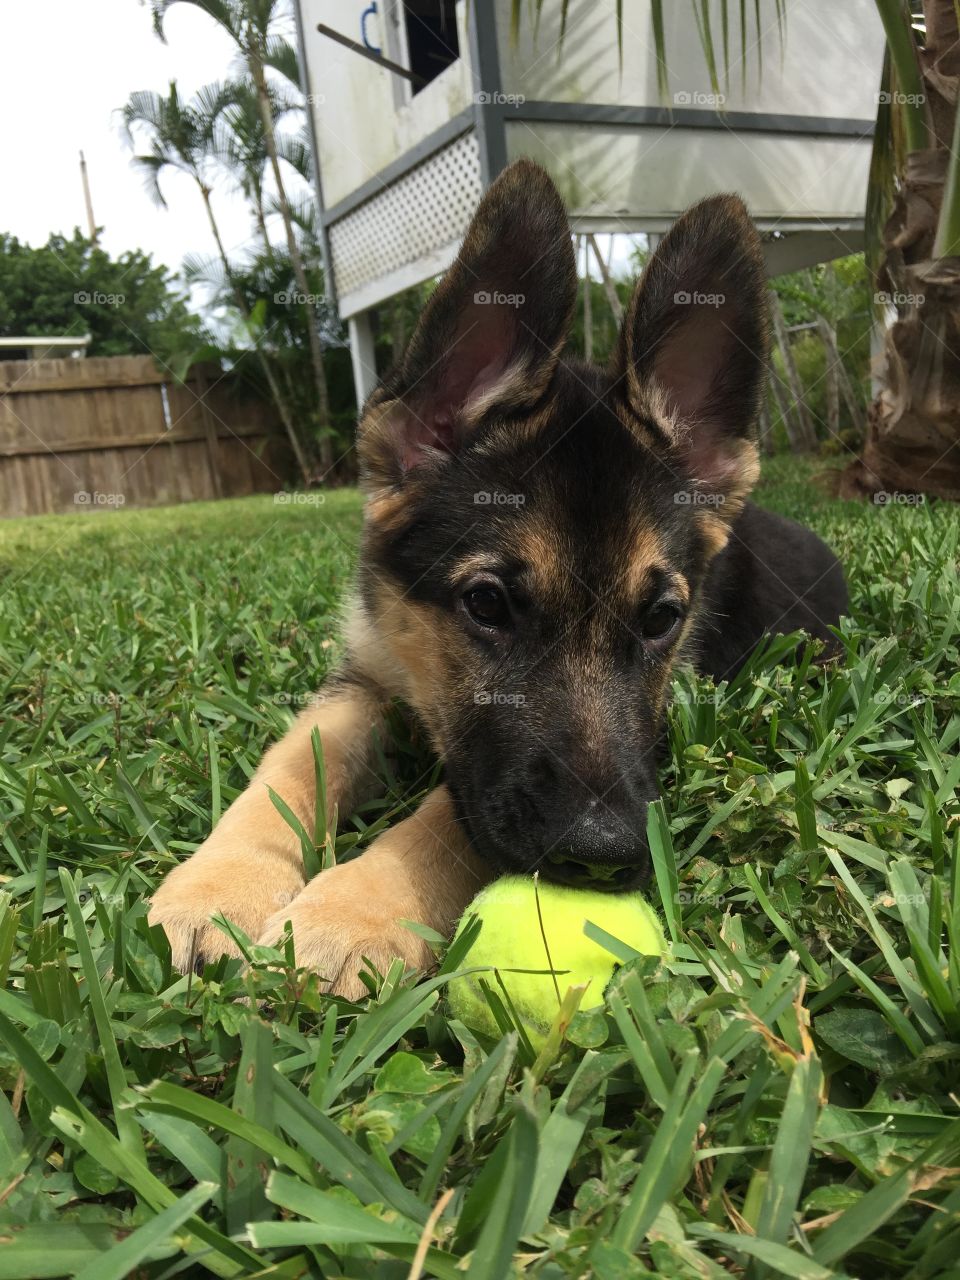 Puppy playing with a Tennis Ball